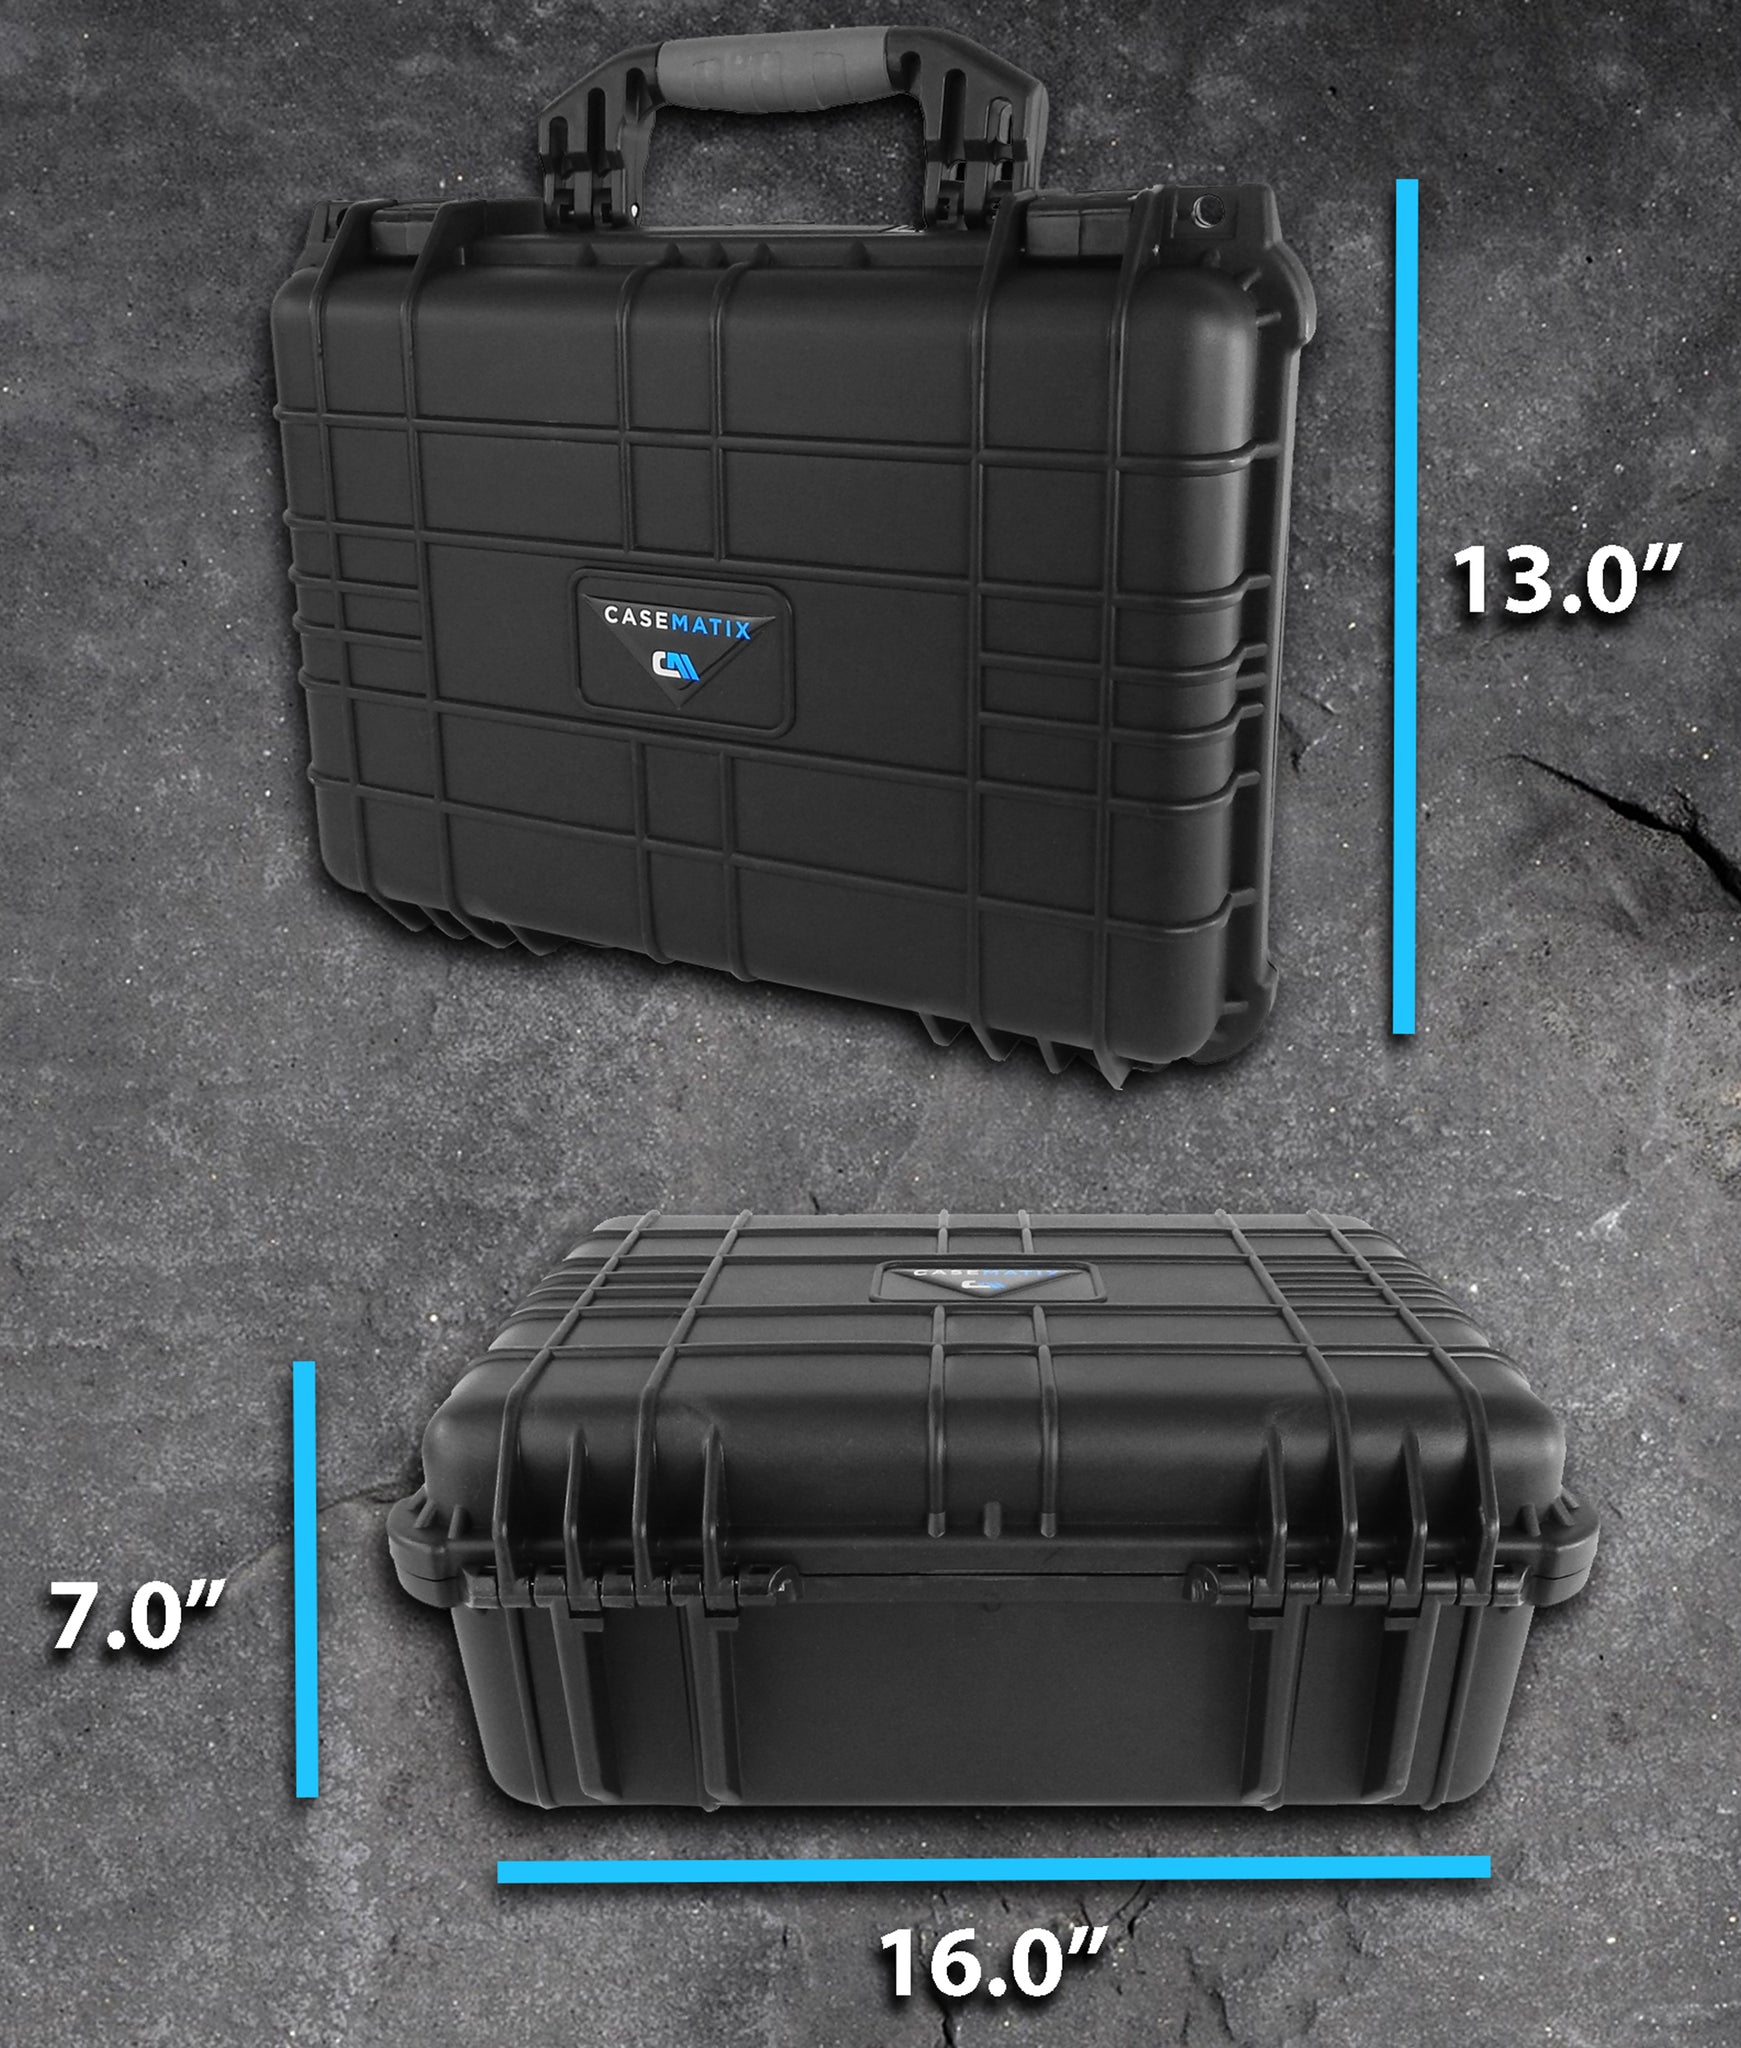 CASEMATIX Hard Shell 9mm Ammo Box for 5.56, 223 or 9mm Bullets - 8  Waterproof Airtight 84 Slot Ammo Case with Custom Impact Absorbing Ammo Can  Foam